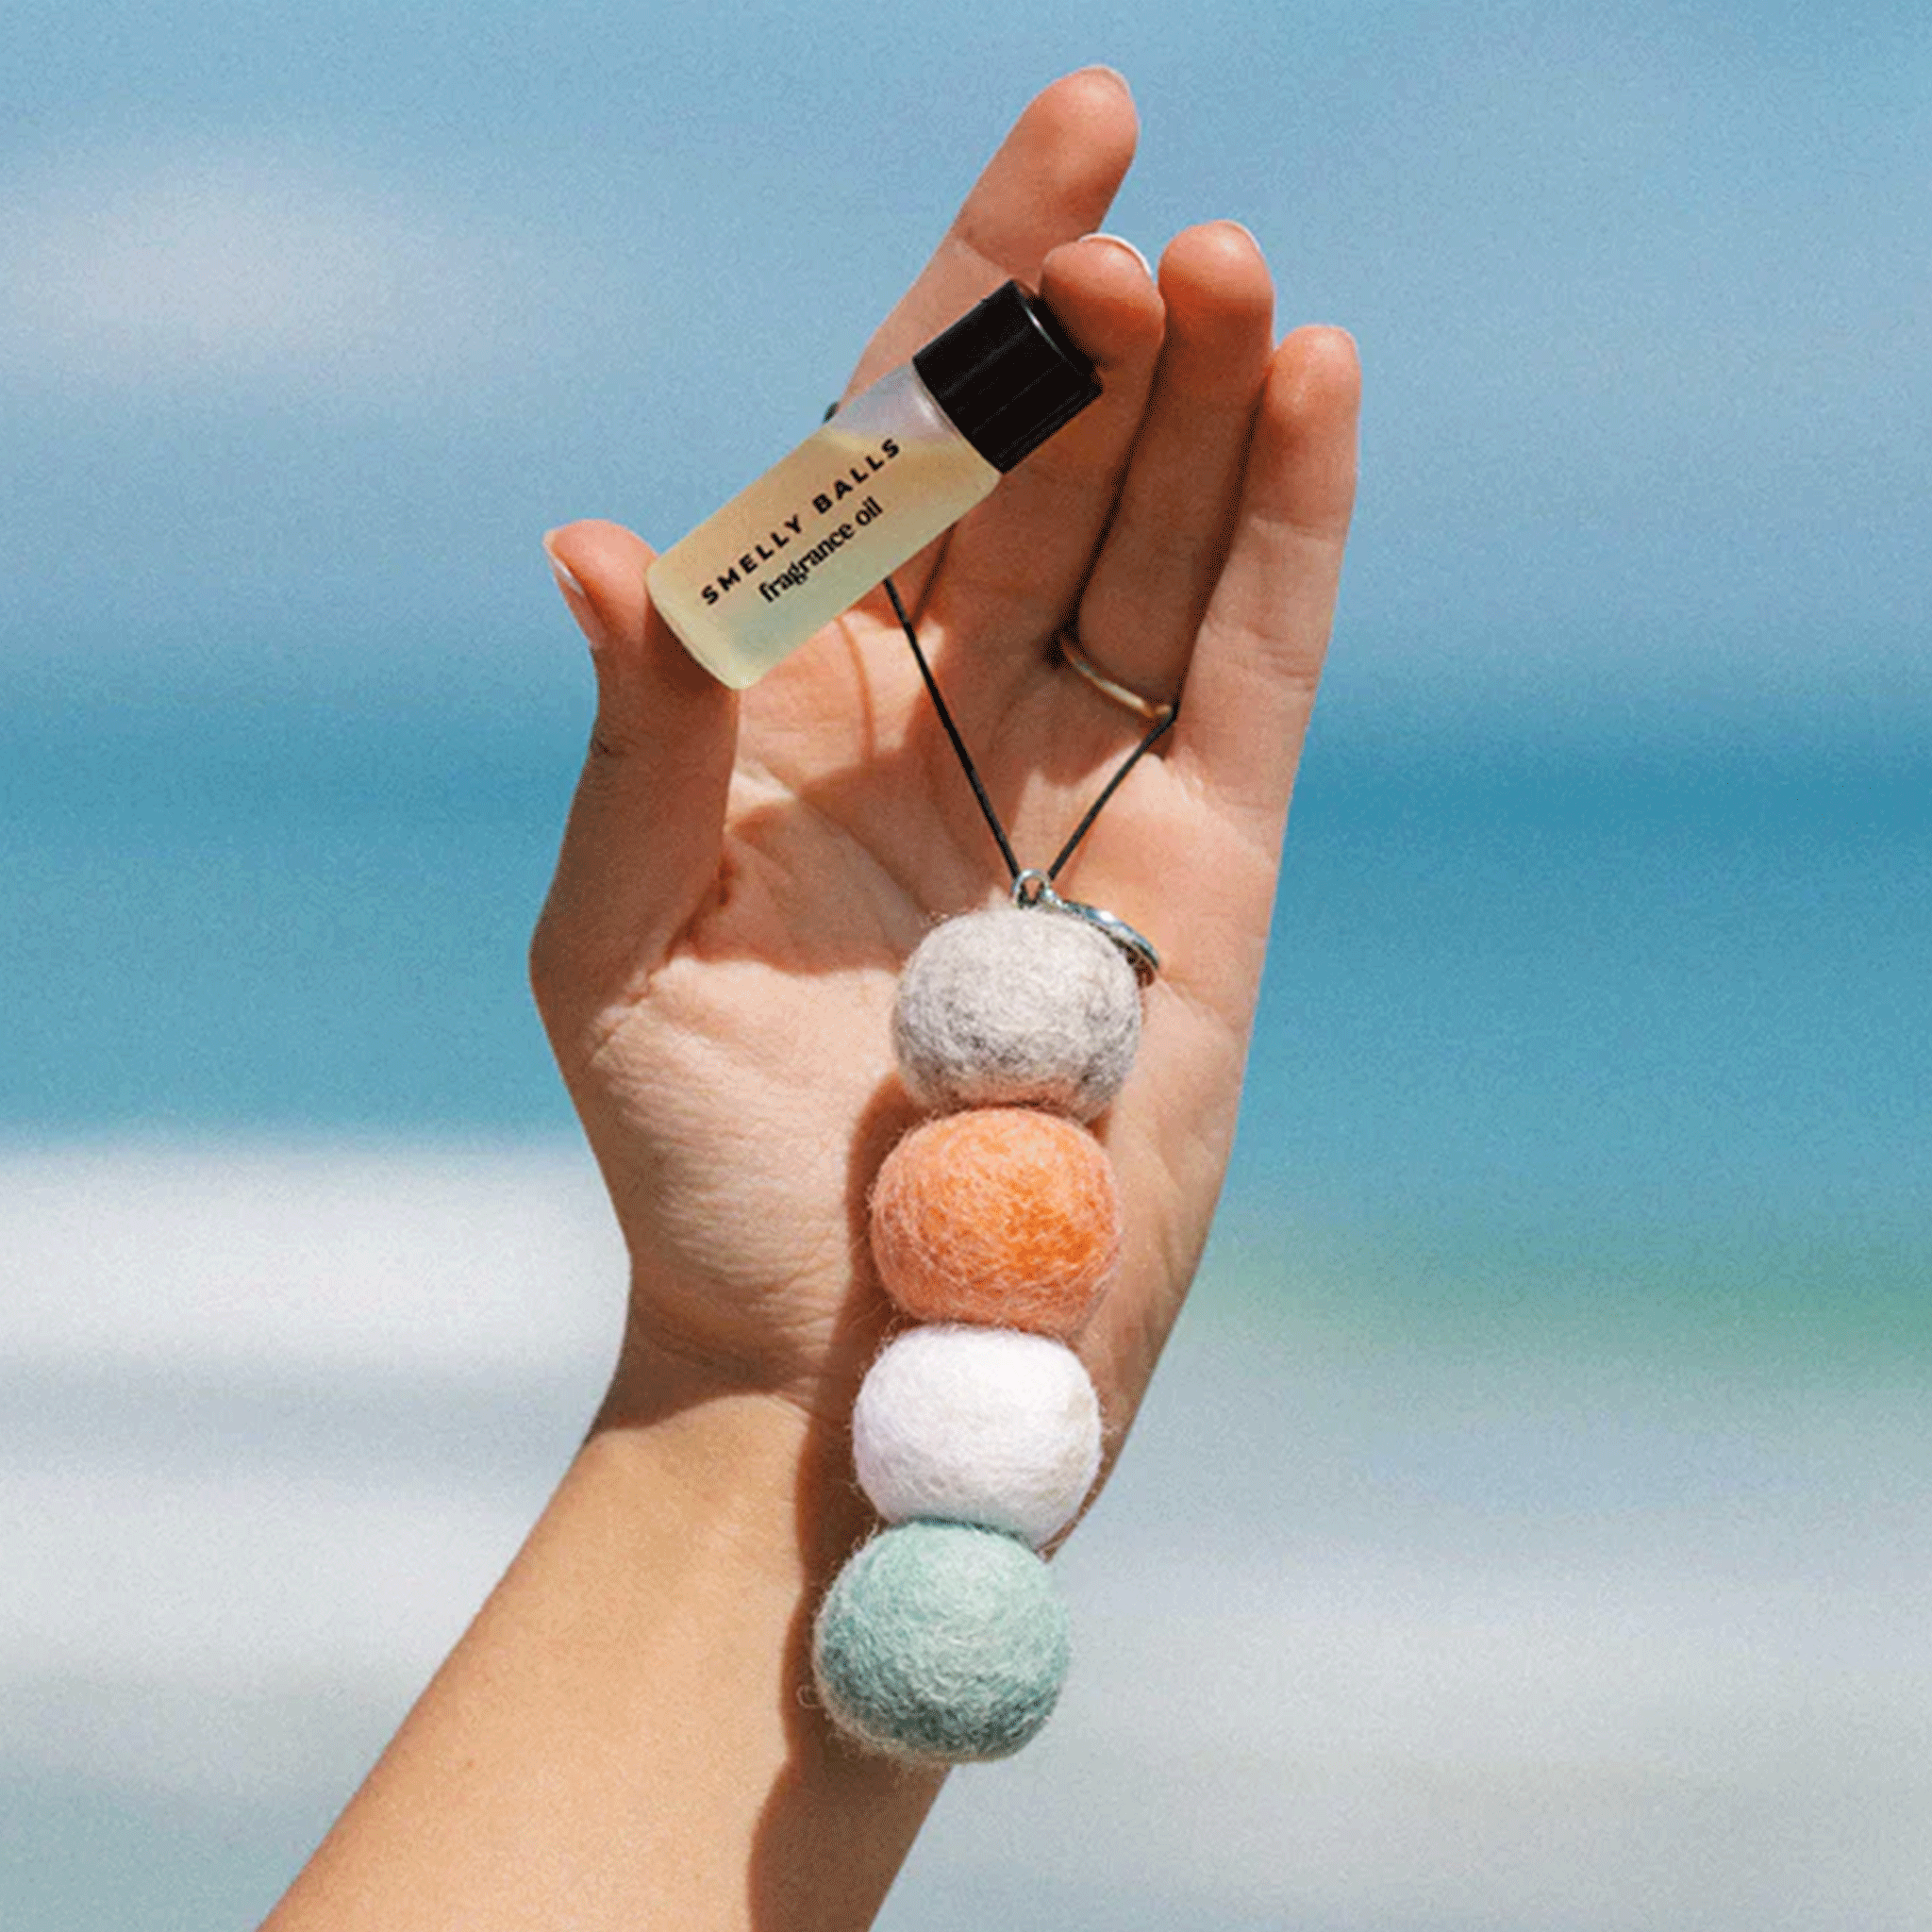 In front of a coastal background is a model holding a small bottle of fragrance oil along with a car air freshener made up of four wool balls.